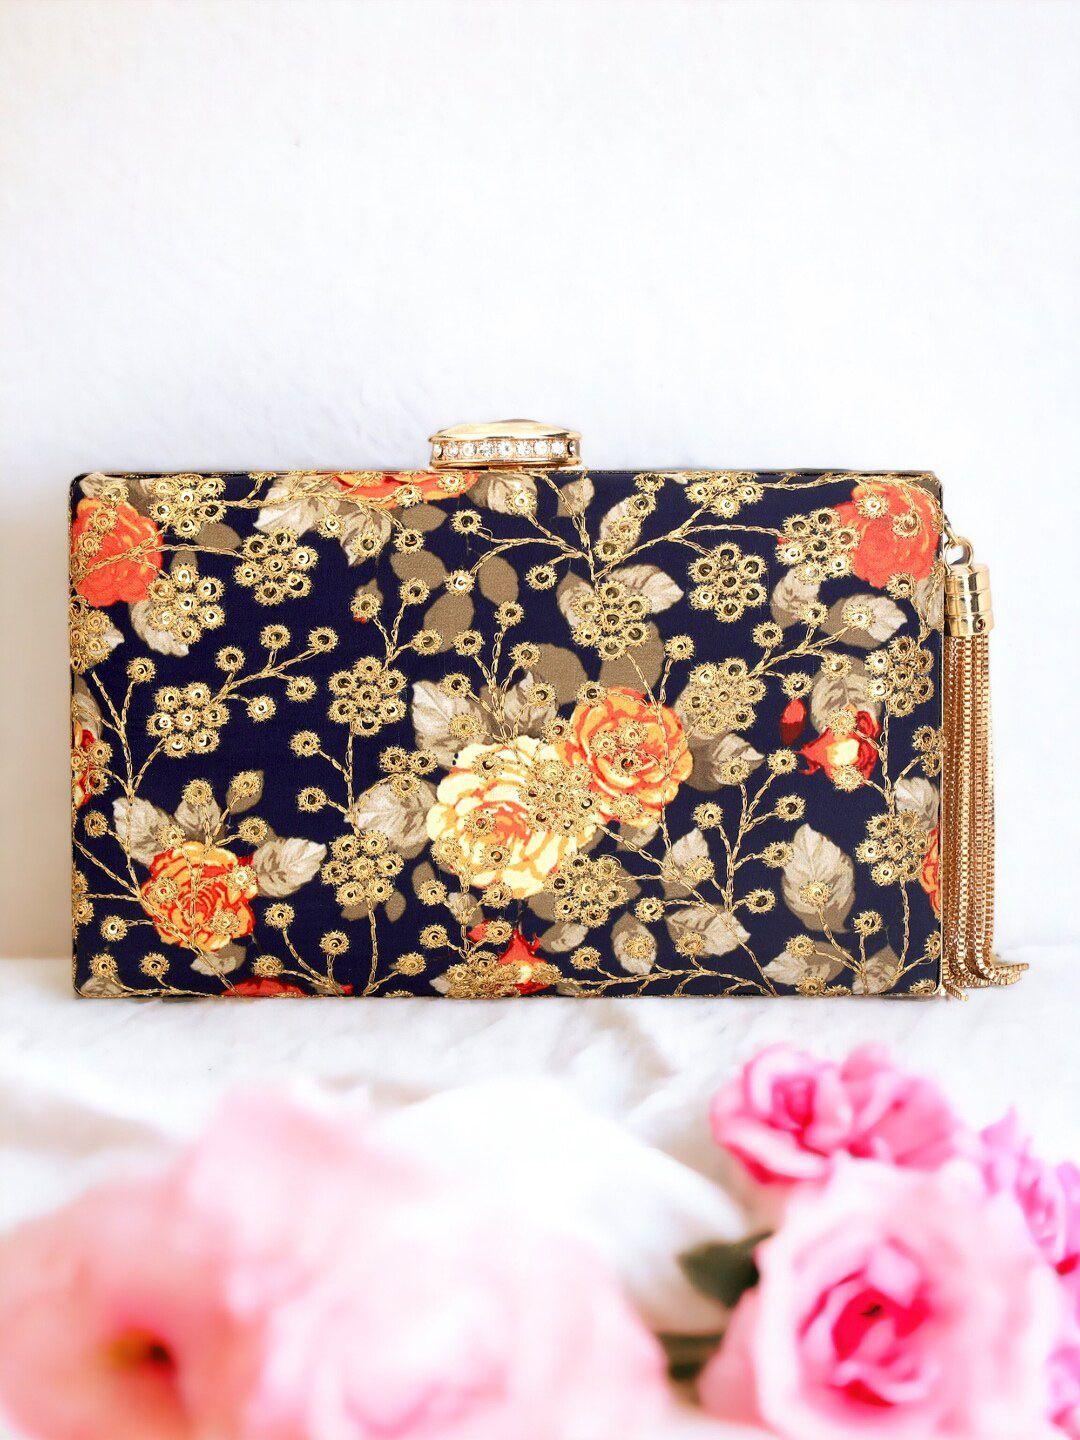 toobacraft blue & gold-toned embroidered box clutch